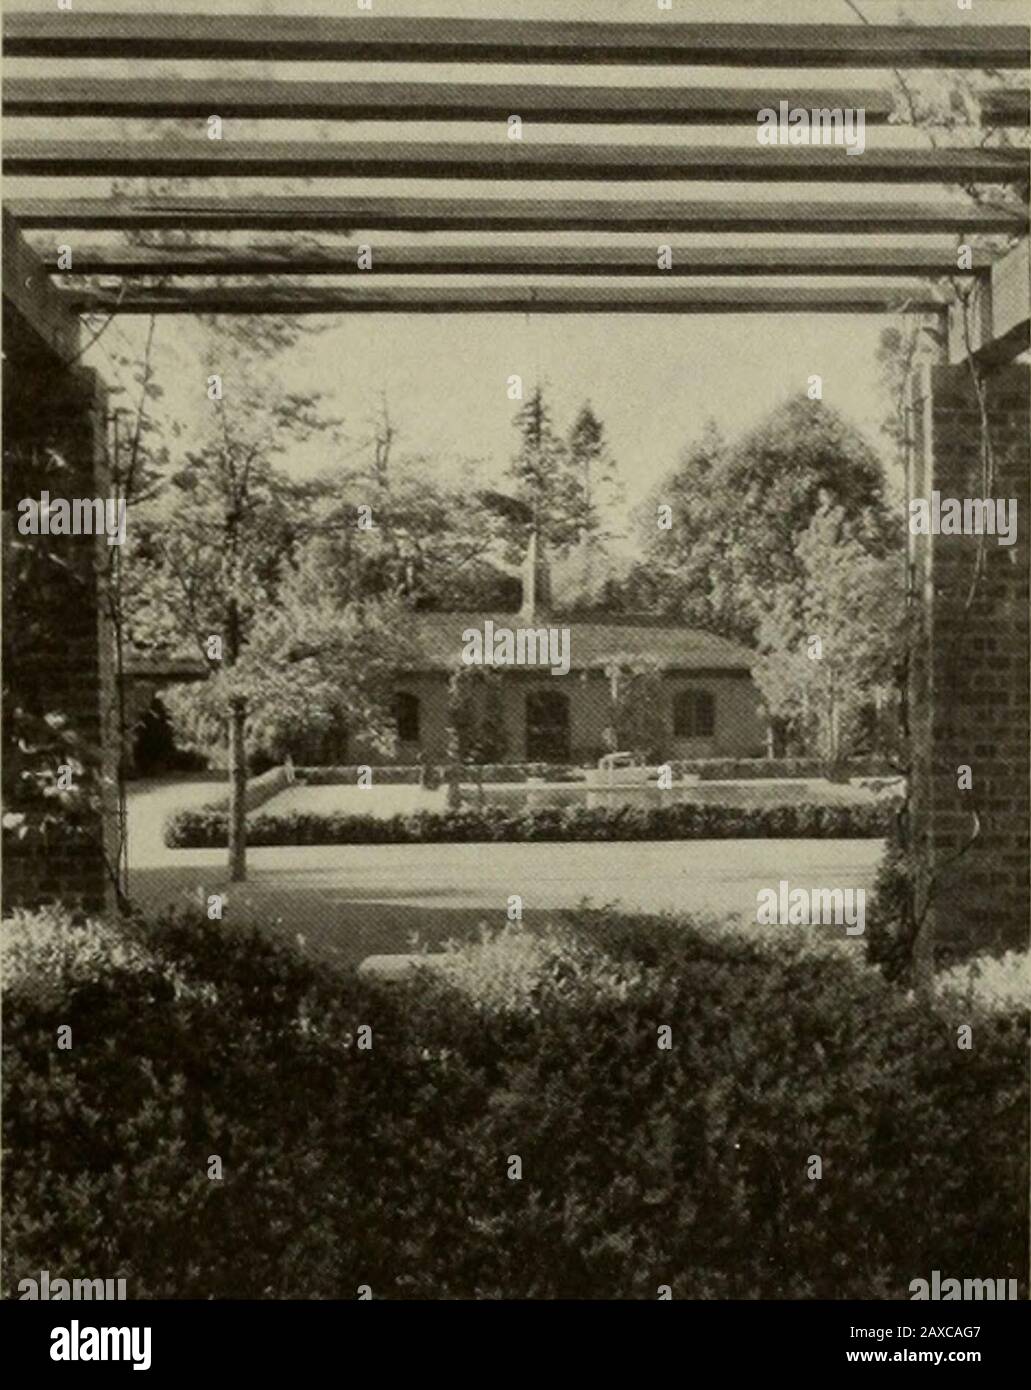 Architect and engineer . OUTBUILDi.sw^ tjl.ilh OF M. LLOYD FRANK, PORTLAND, OREGONHerman Brookman, Architect August, 1930 ARCHITECT AND ENGINEER. 53 OUTBUILDINGS On The Estate Of M. LLOYD FRANK, ESQ. Portland, Oregon HERMAN BROOKMAN, Architect Editors Note—Other views of the Estate were shown inThe Architect and Engineer for April, 1929. BATH HOUSE, ESTATE OF M. LLOYD FRANKHerman Brookman, Architect Stock Photo